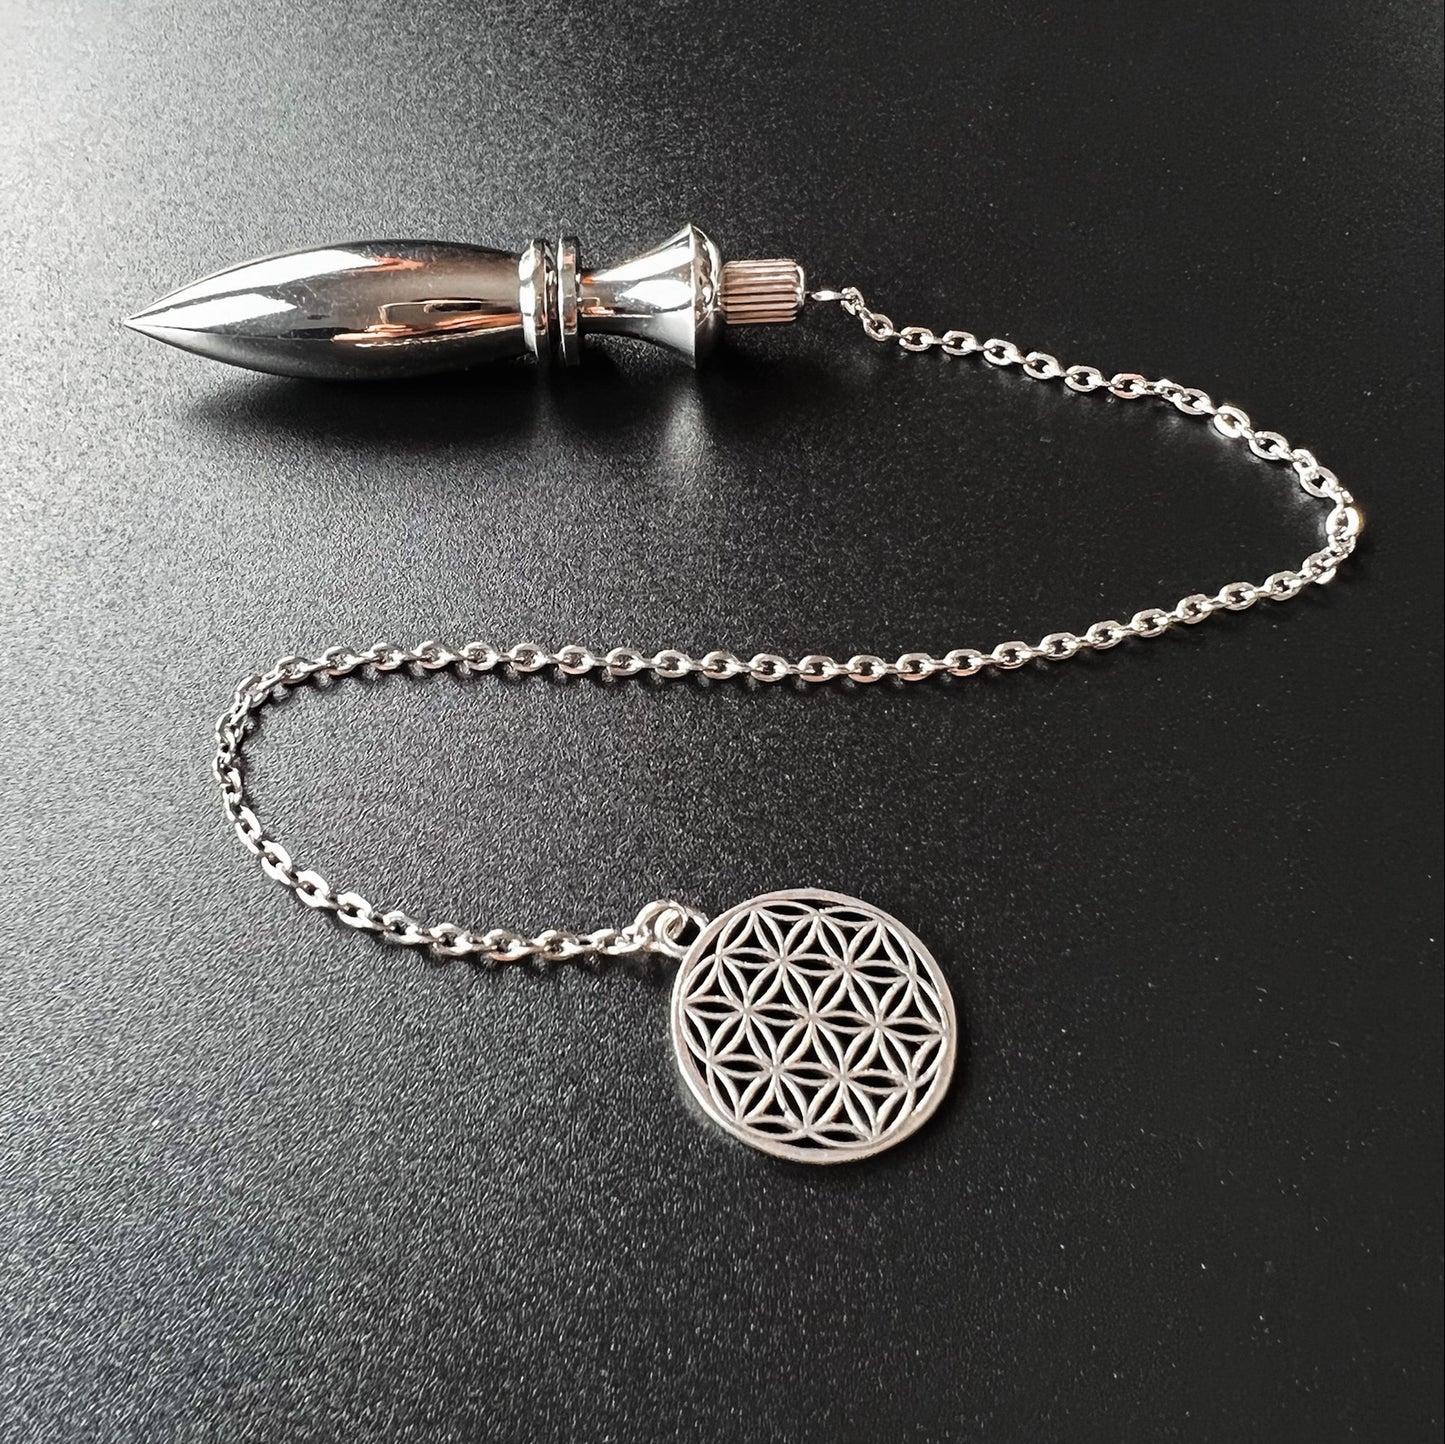 Metal Thot pendulum with a flower of life symbol Baguette Magick